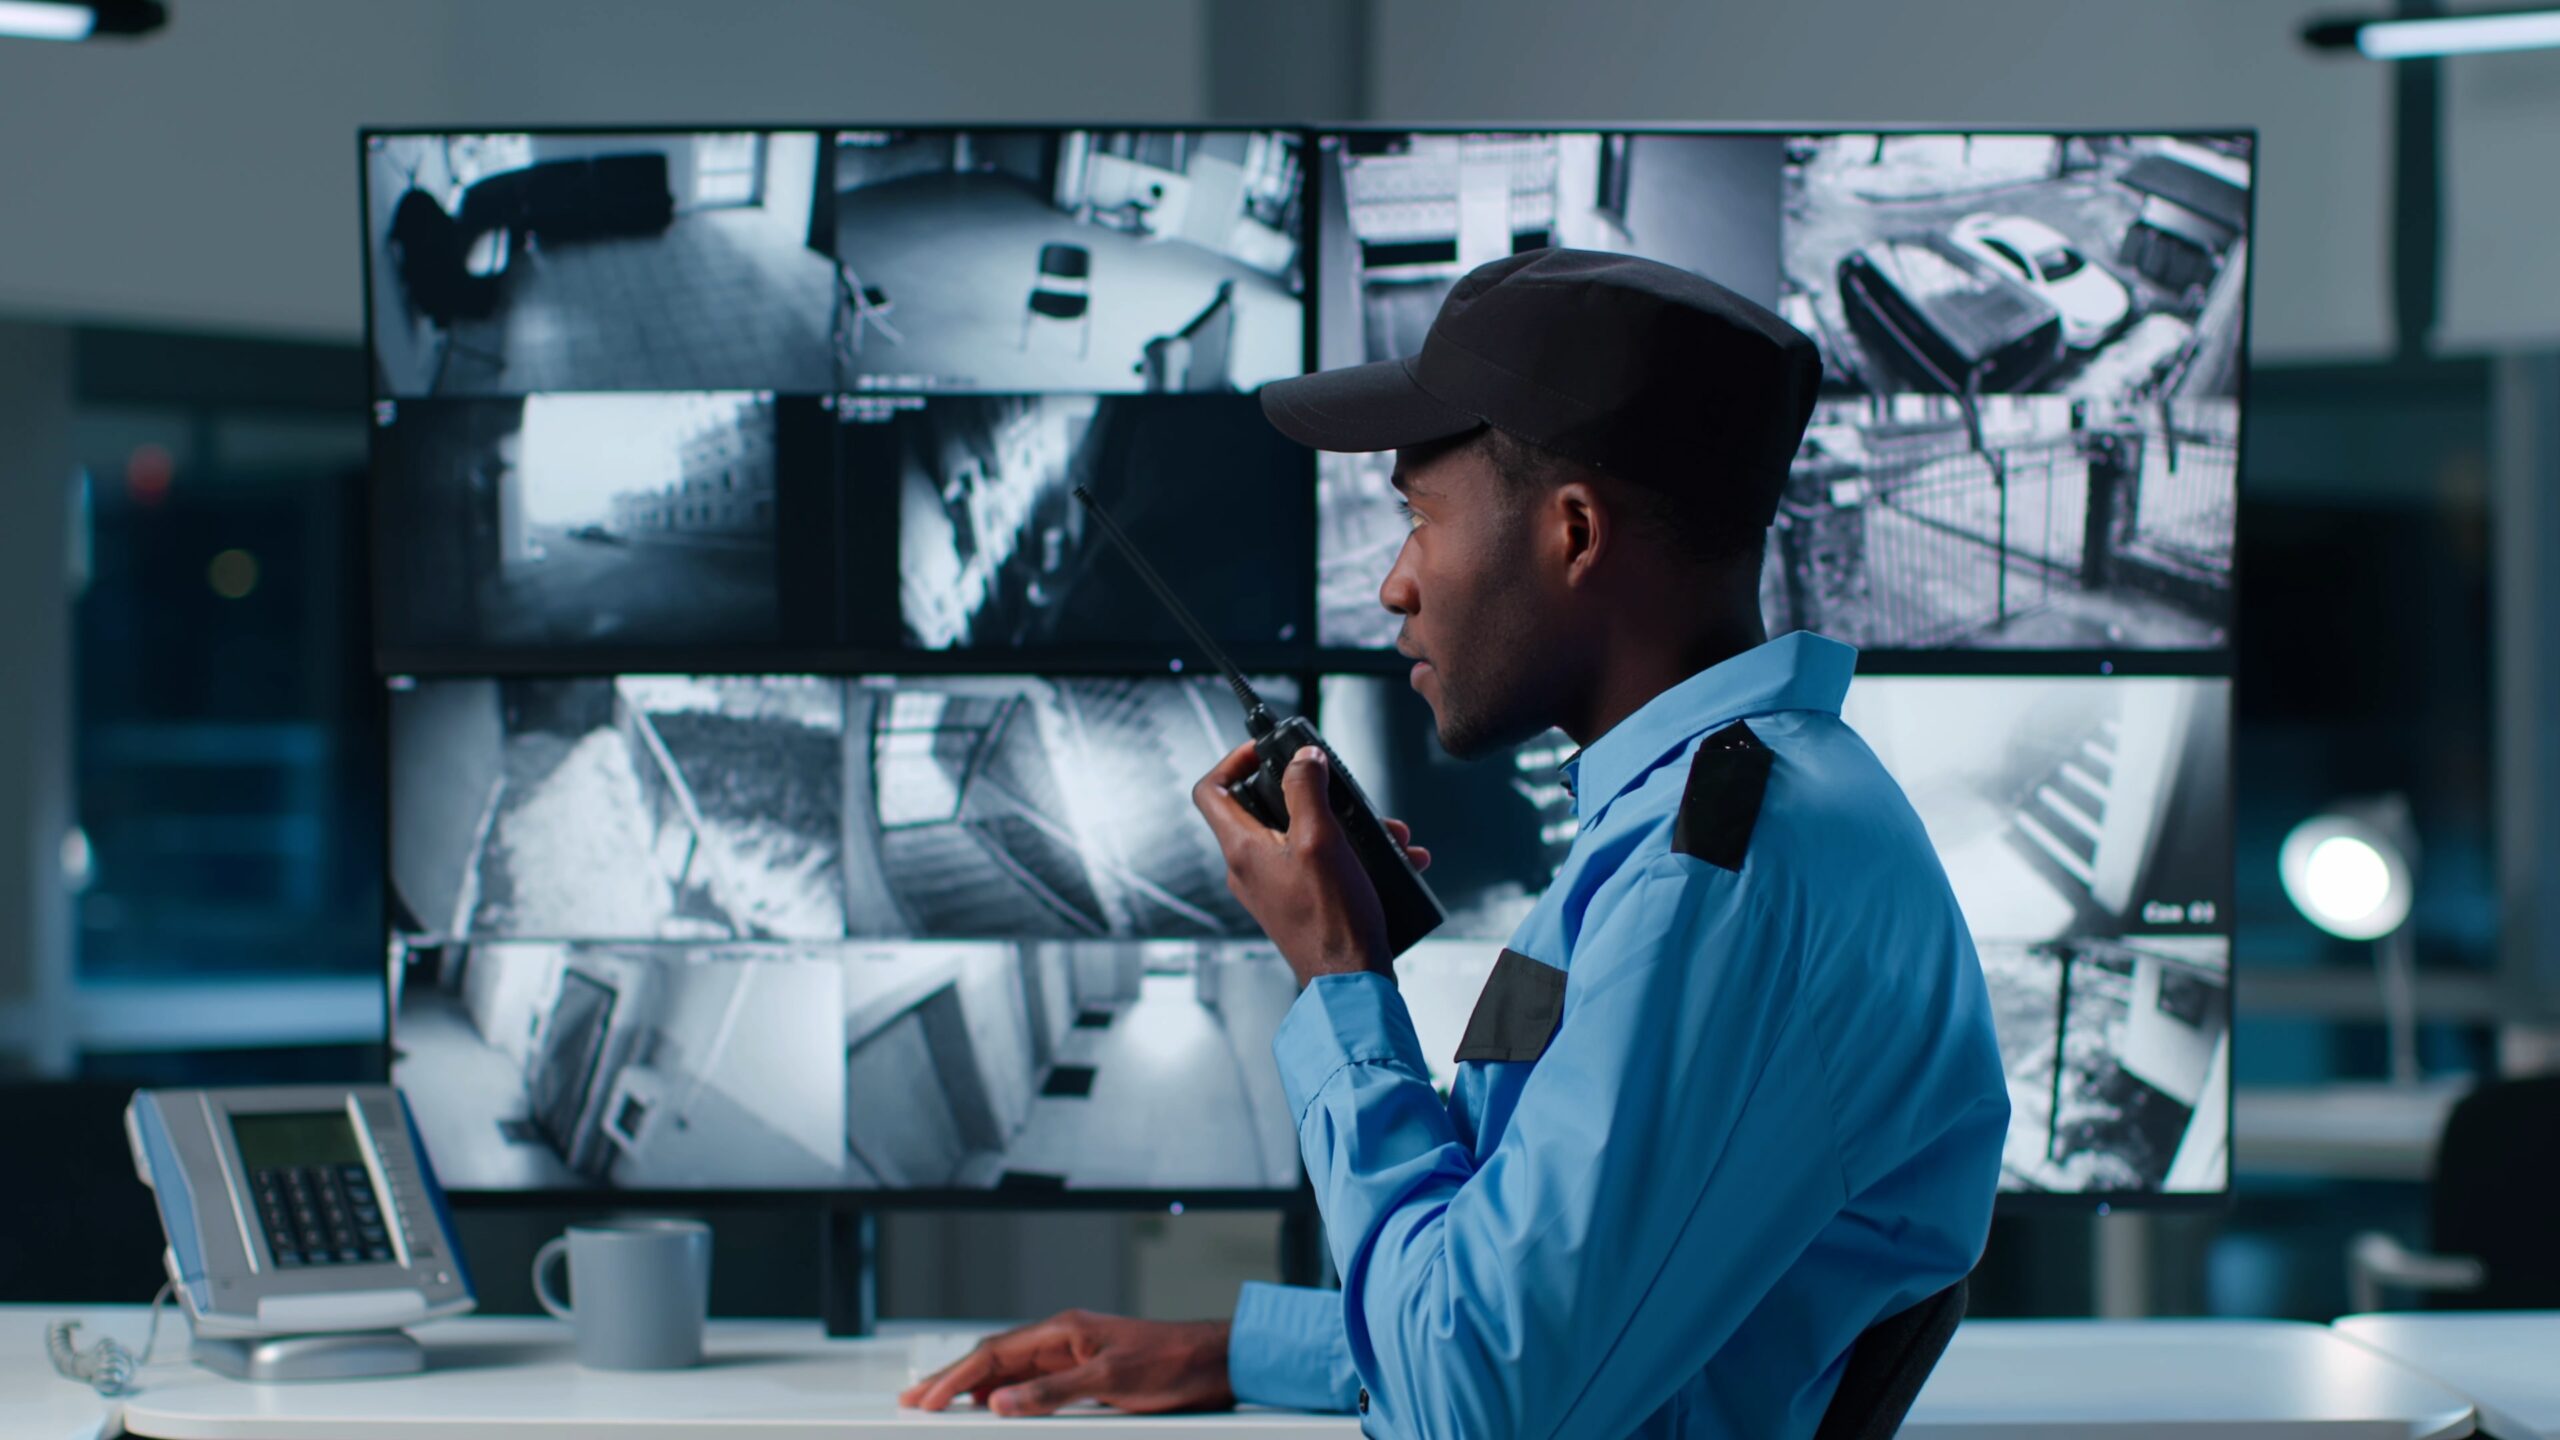 Adapting to the Times: The Transformation of Security Officers